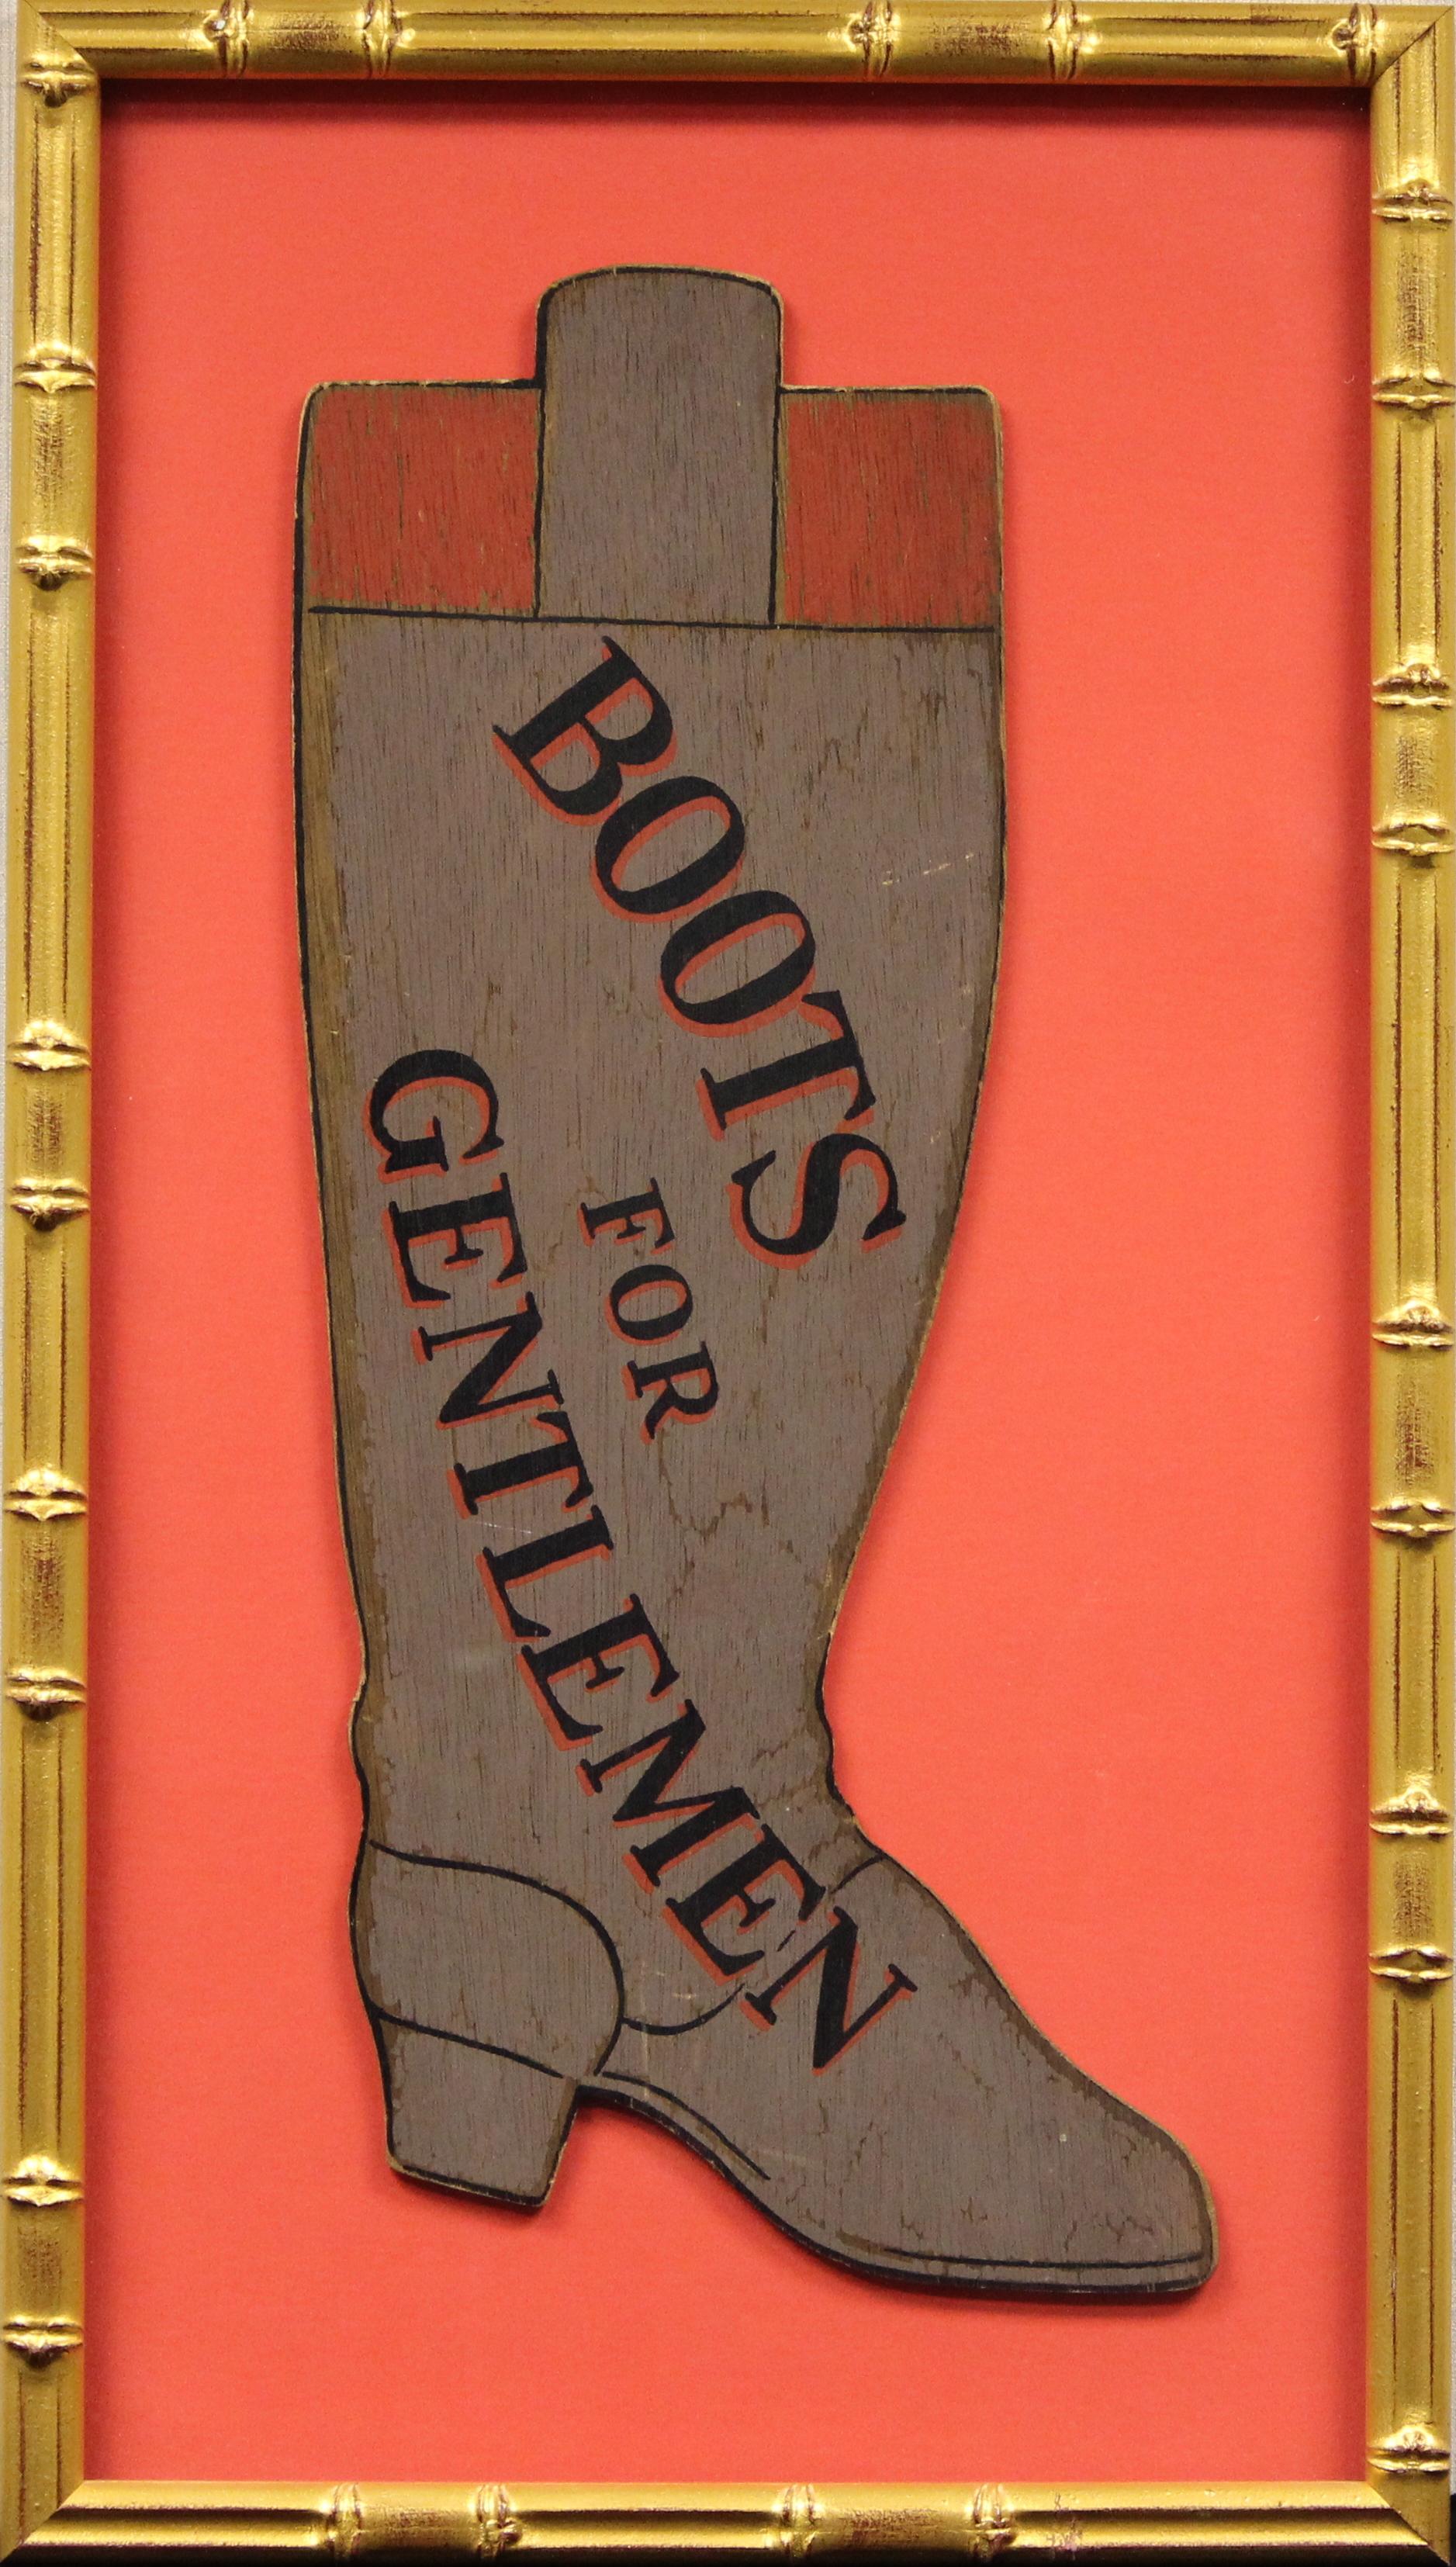 "Boots For Gentlemen" Wood Advert Sign - Mixed Media Art by Unknown